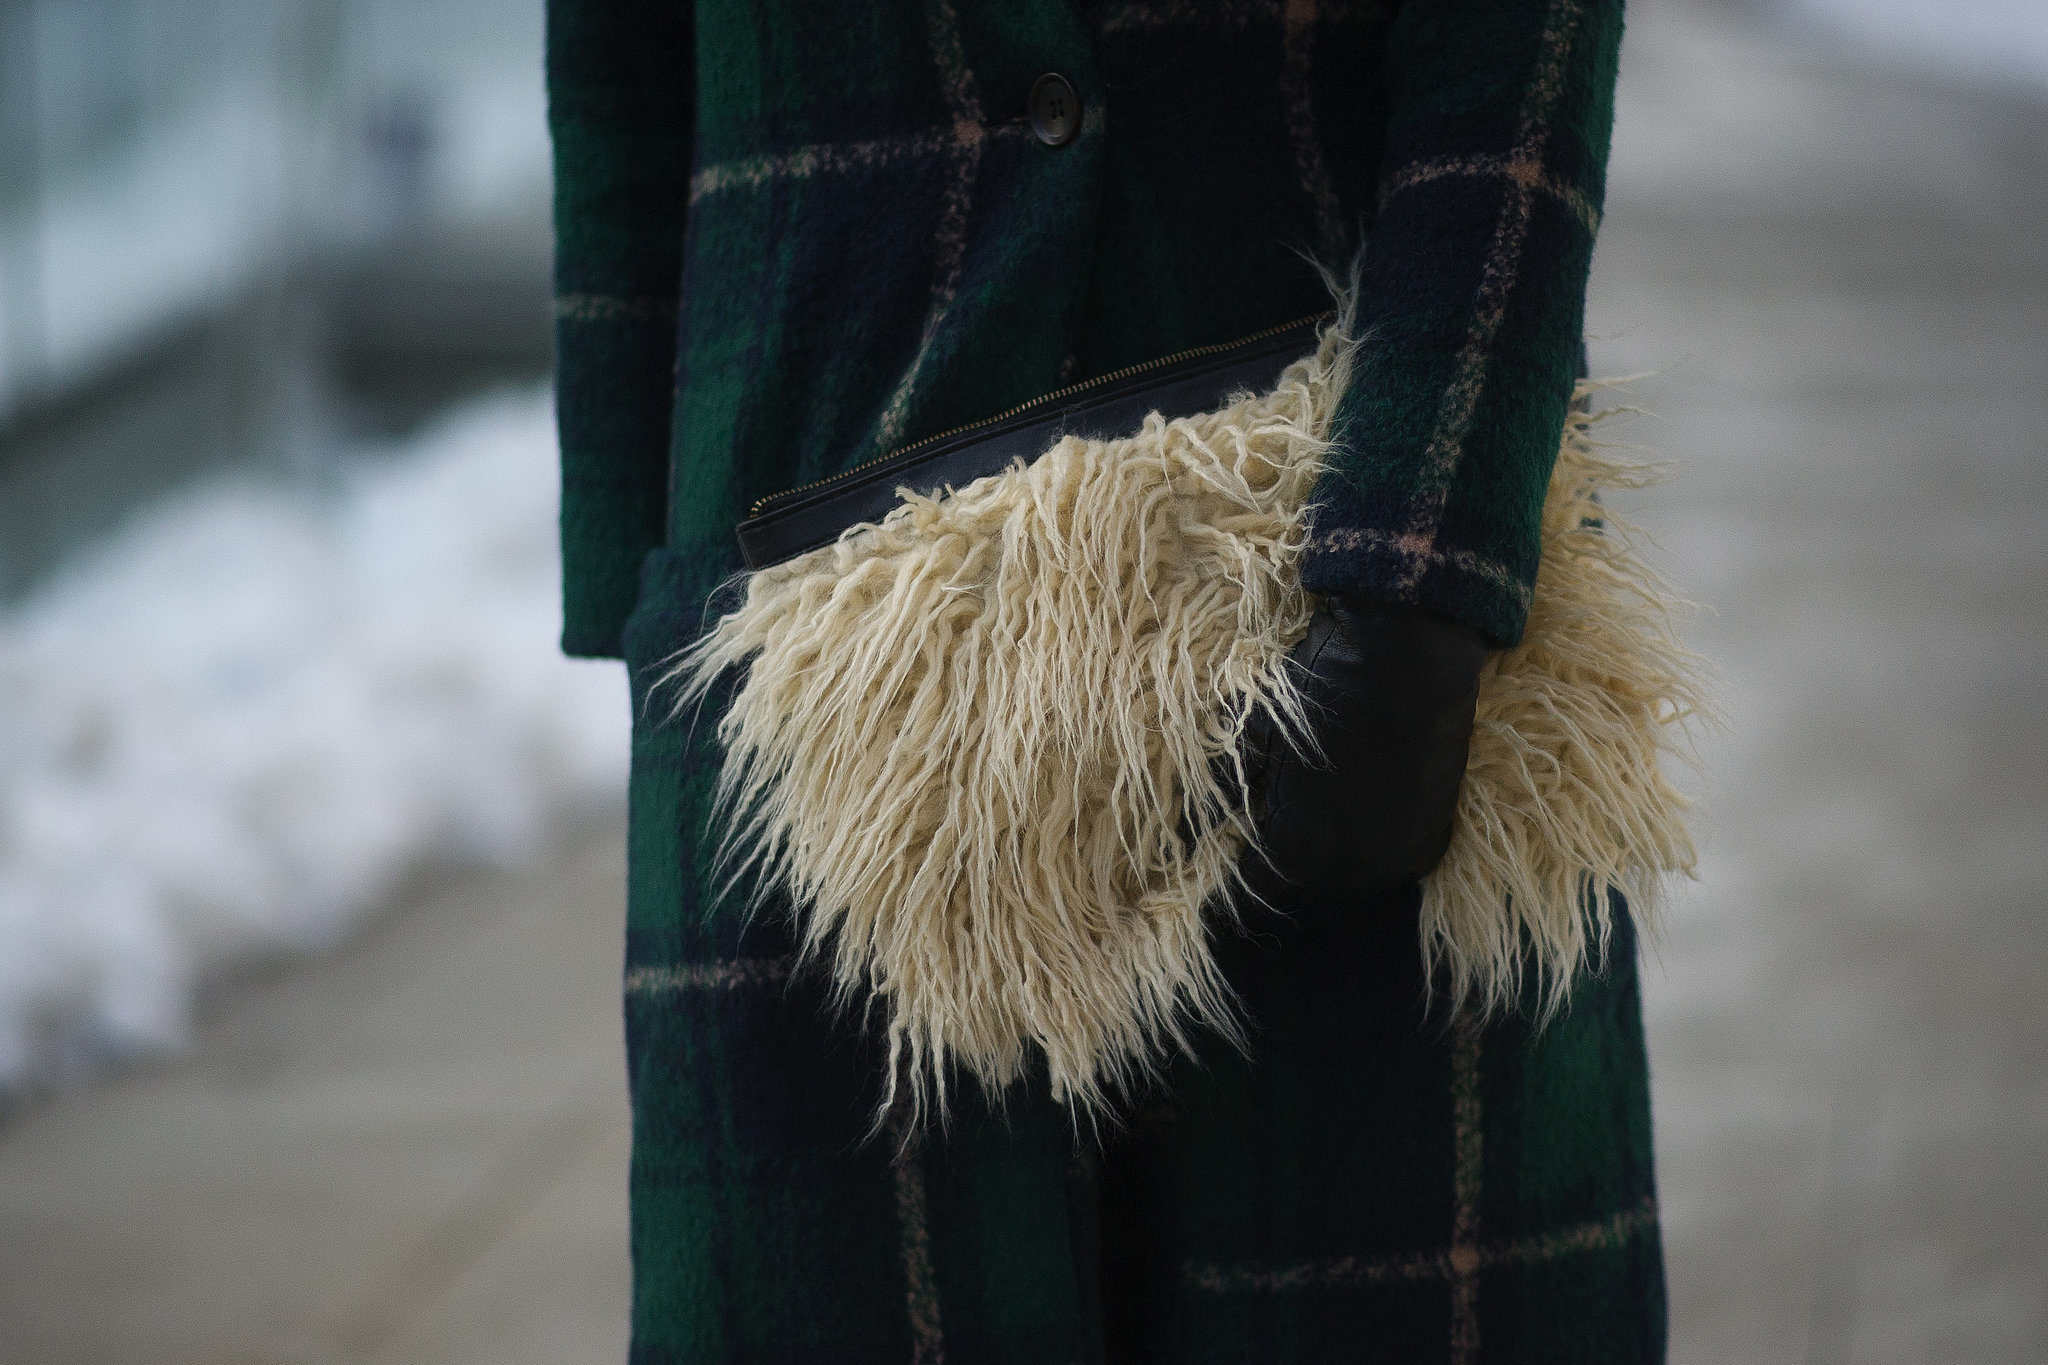 So clutch: this fuzzy carryall. 
